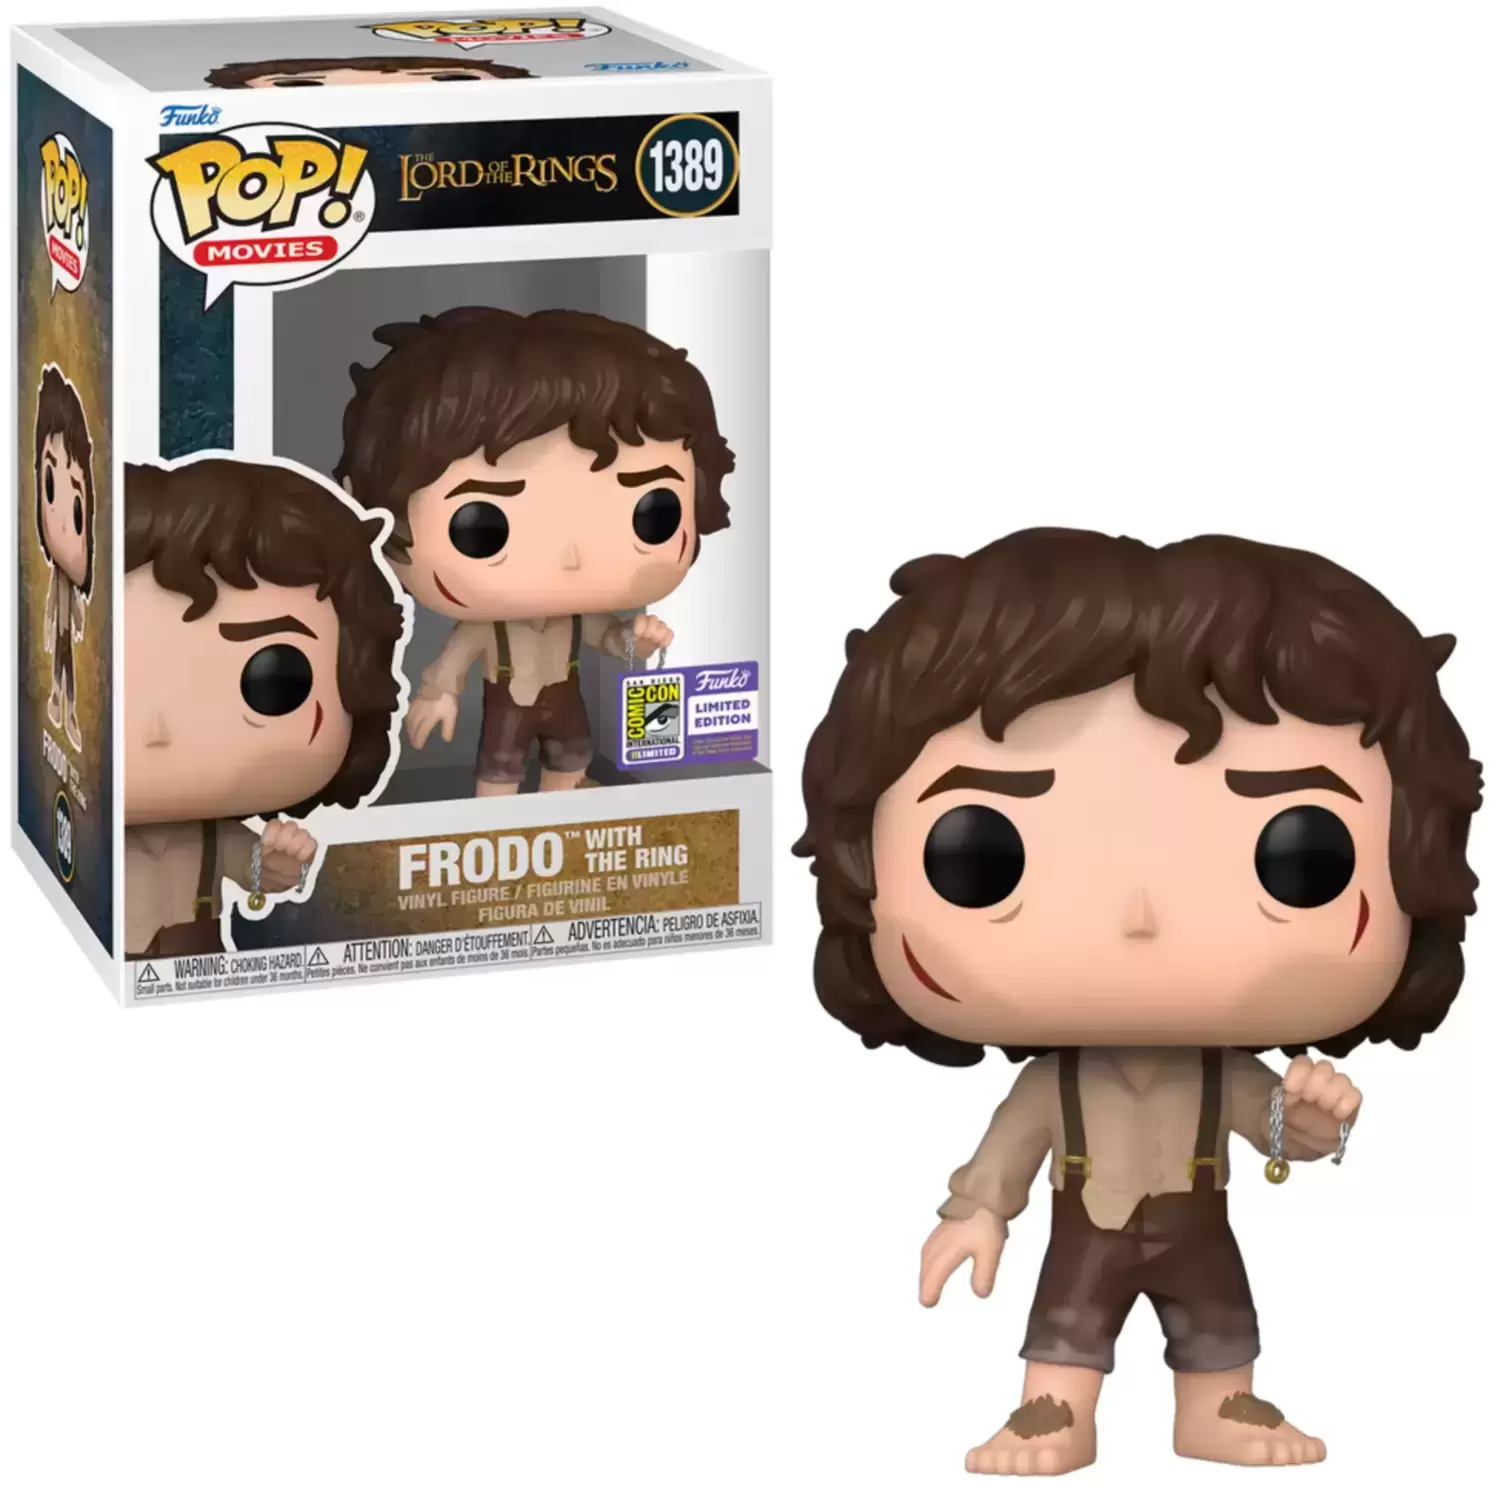 POP! Movies - Lord Of The Rings - Frodo with The Ring